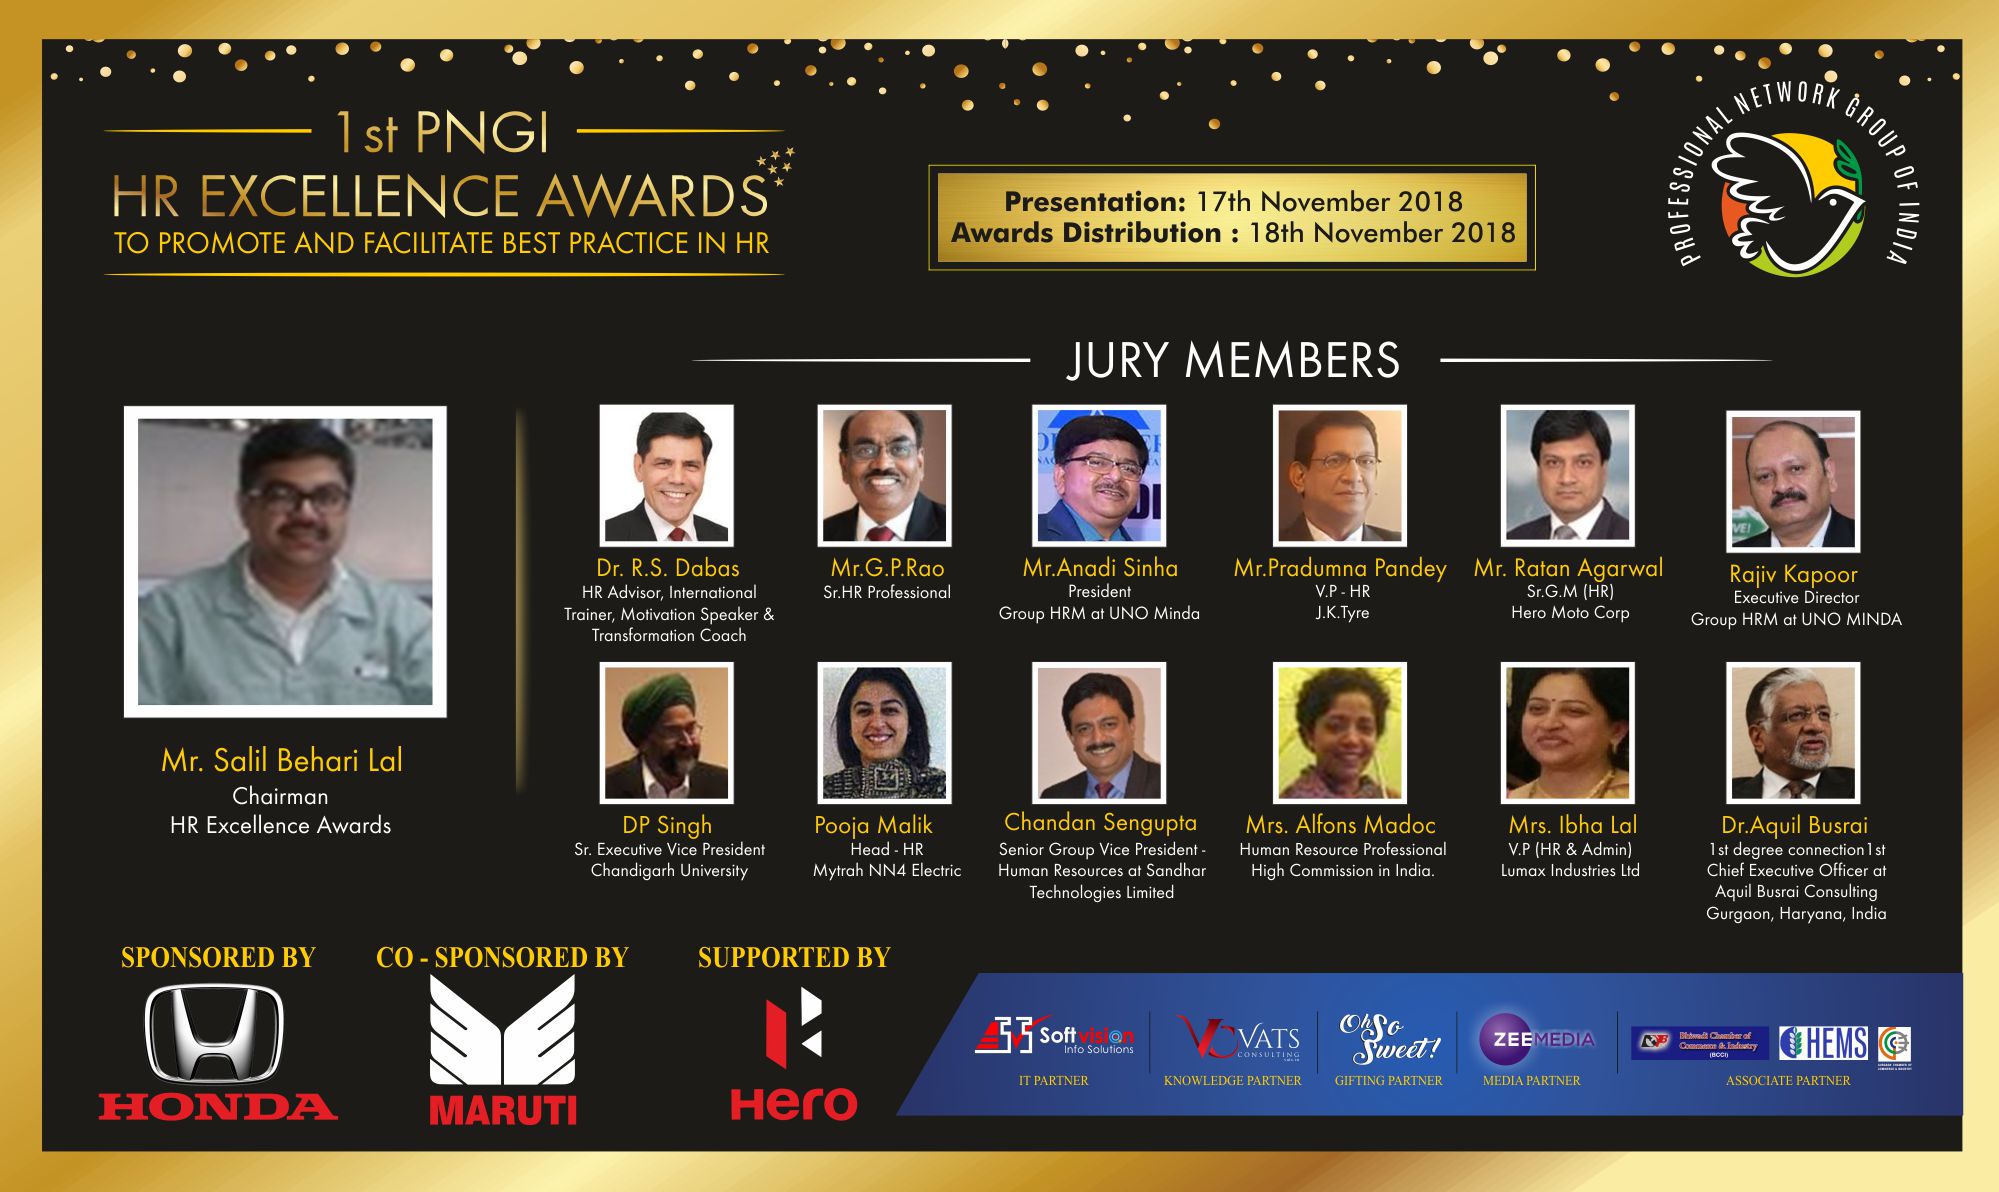 amazing workplaces, 1st PNGI HR Excellence Awards, event, HR